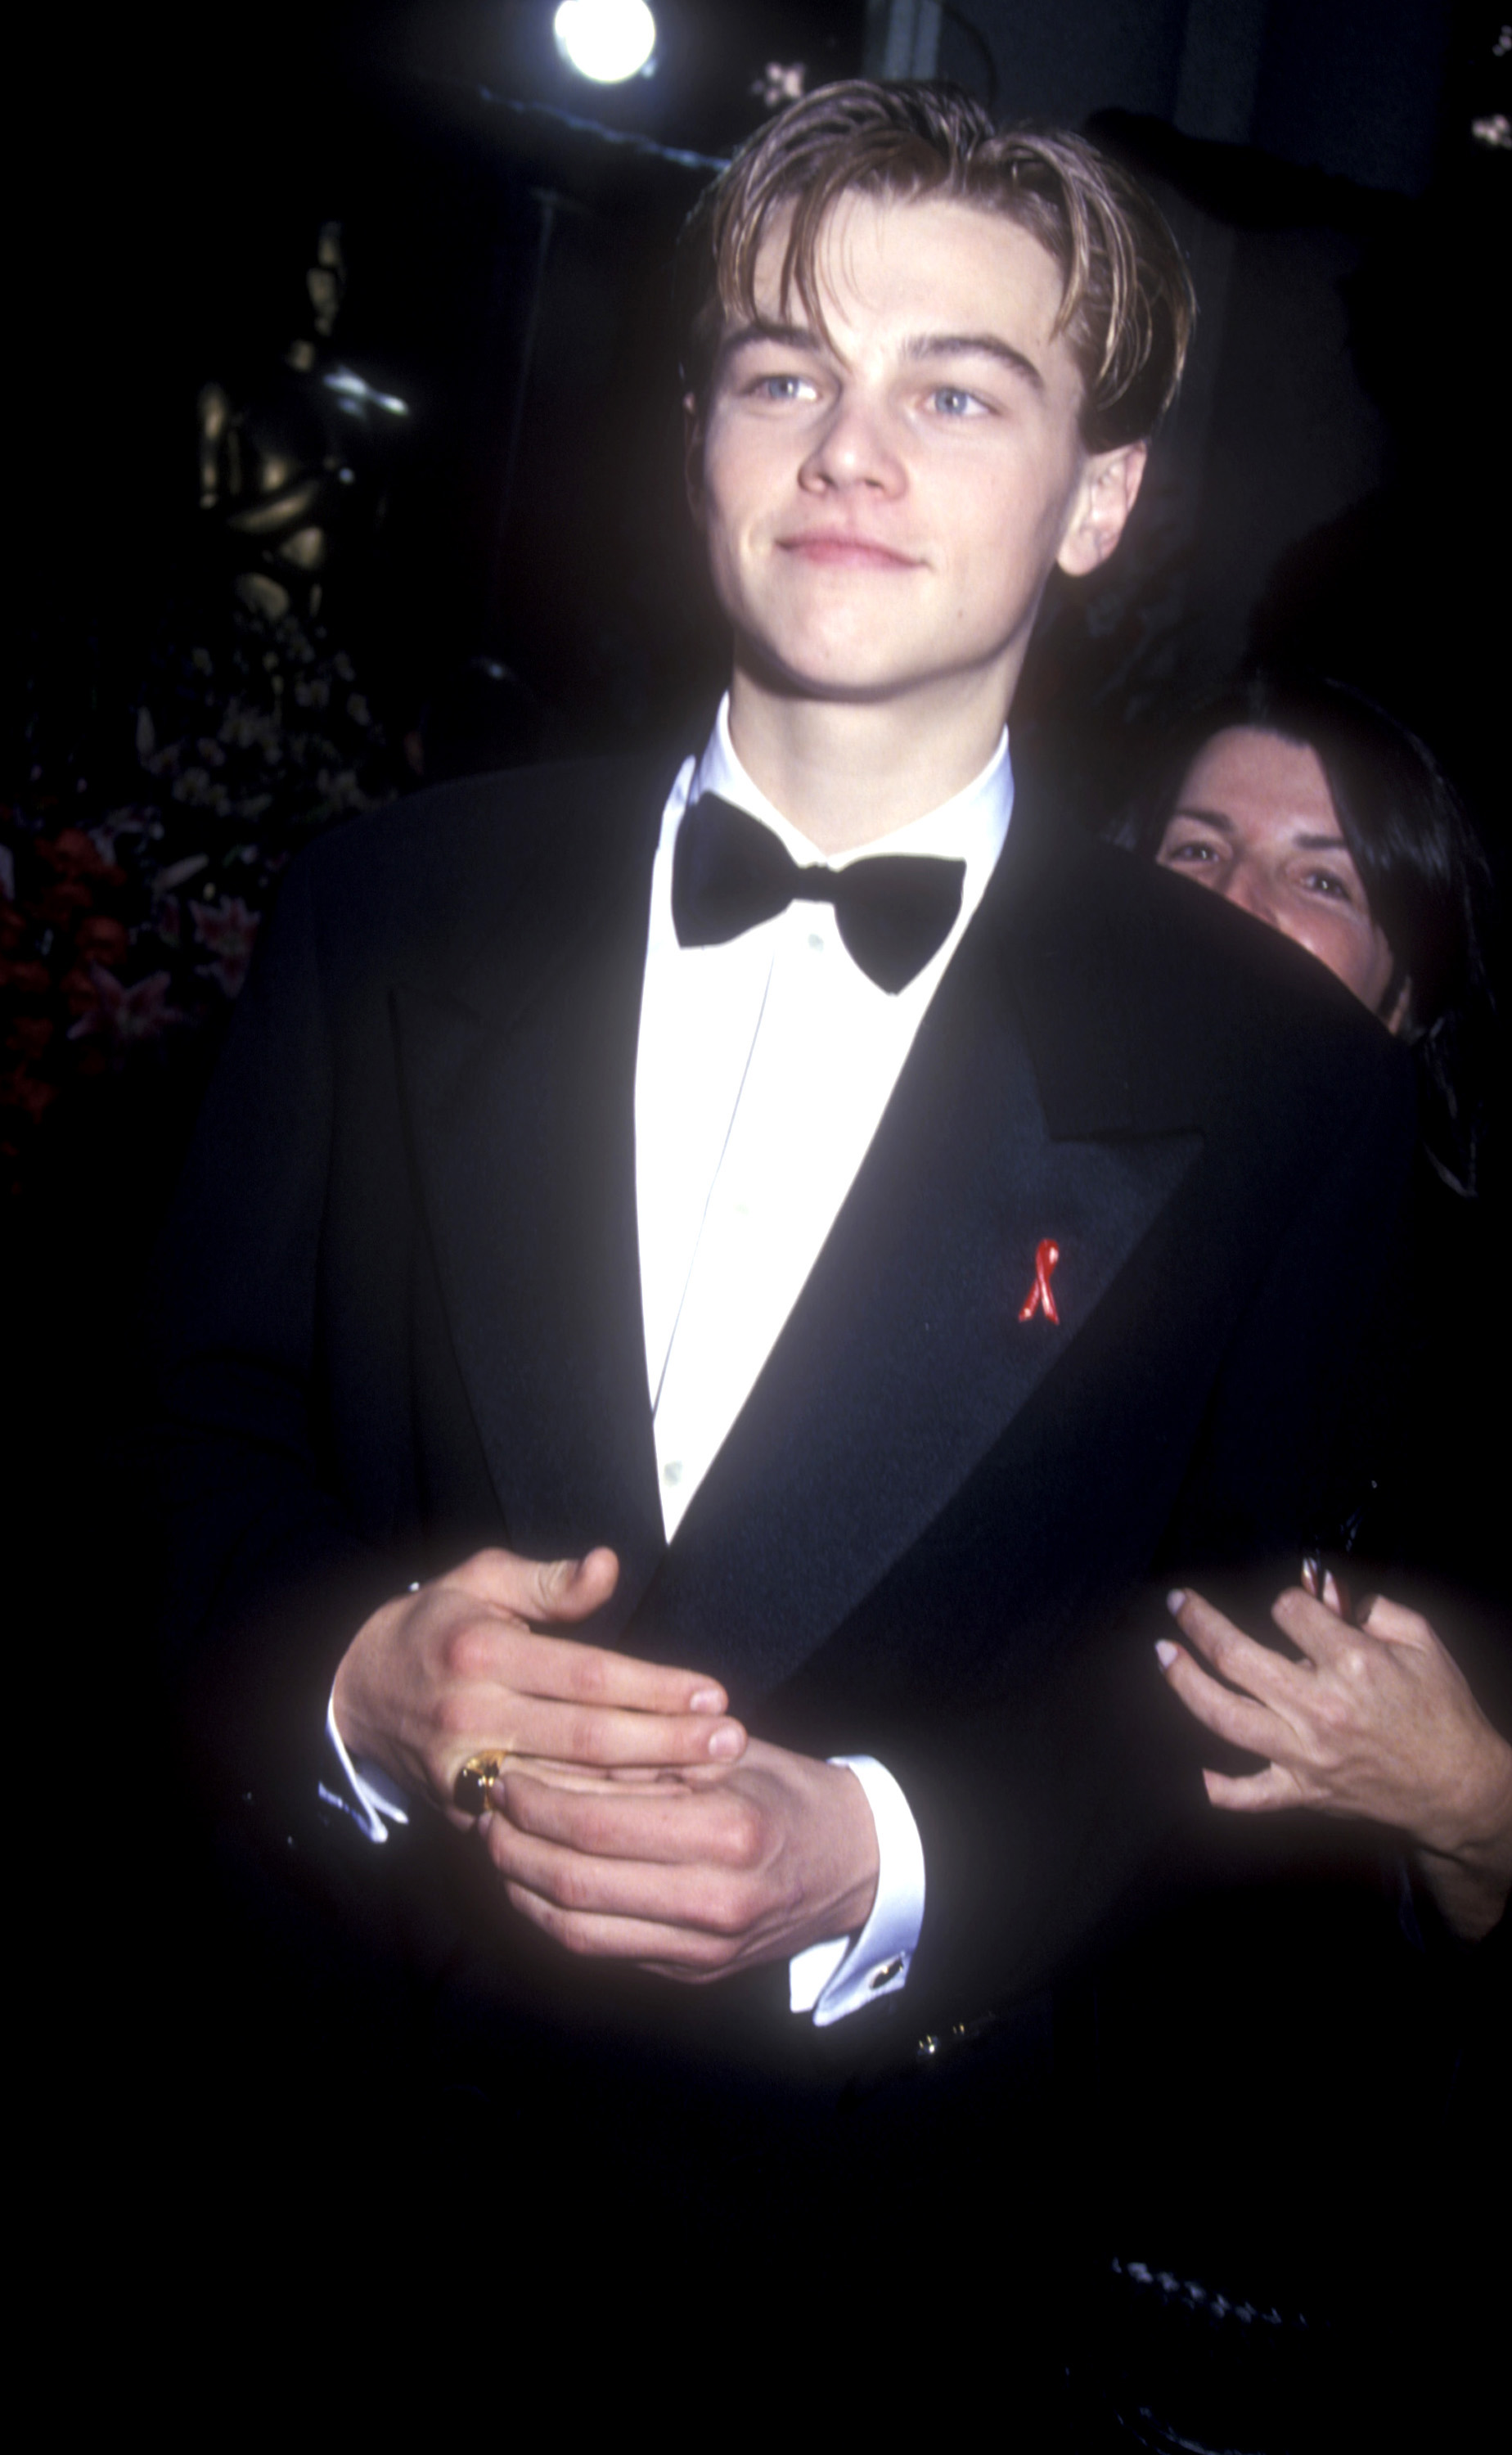 Leonardo DiCaprio during the 66th Annual Academy Awards in Los Angeles on March 21, 1994.